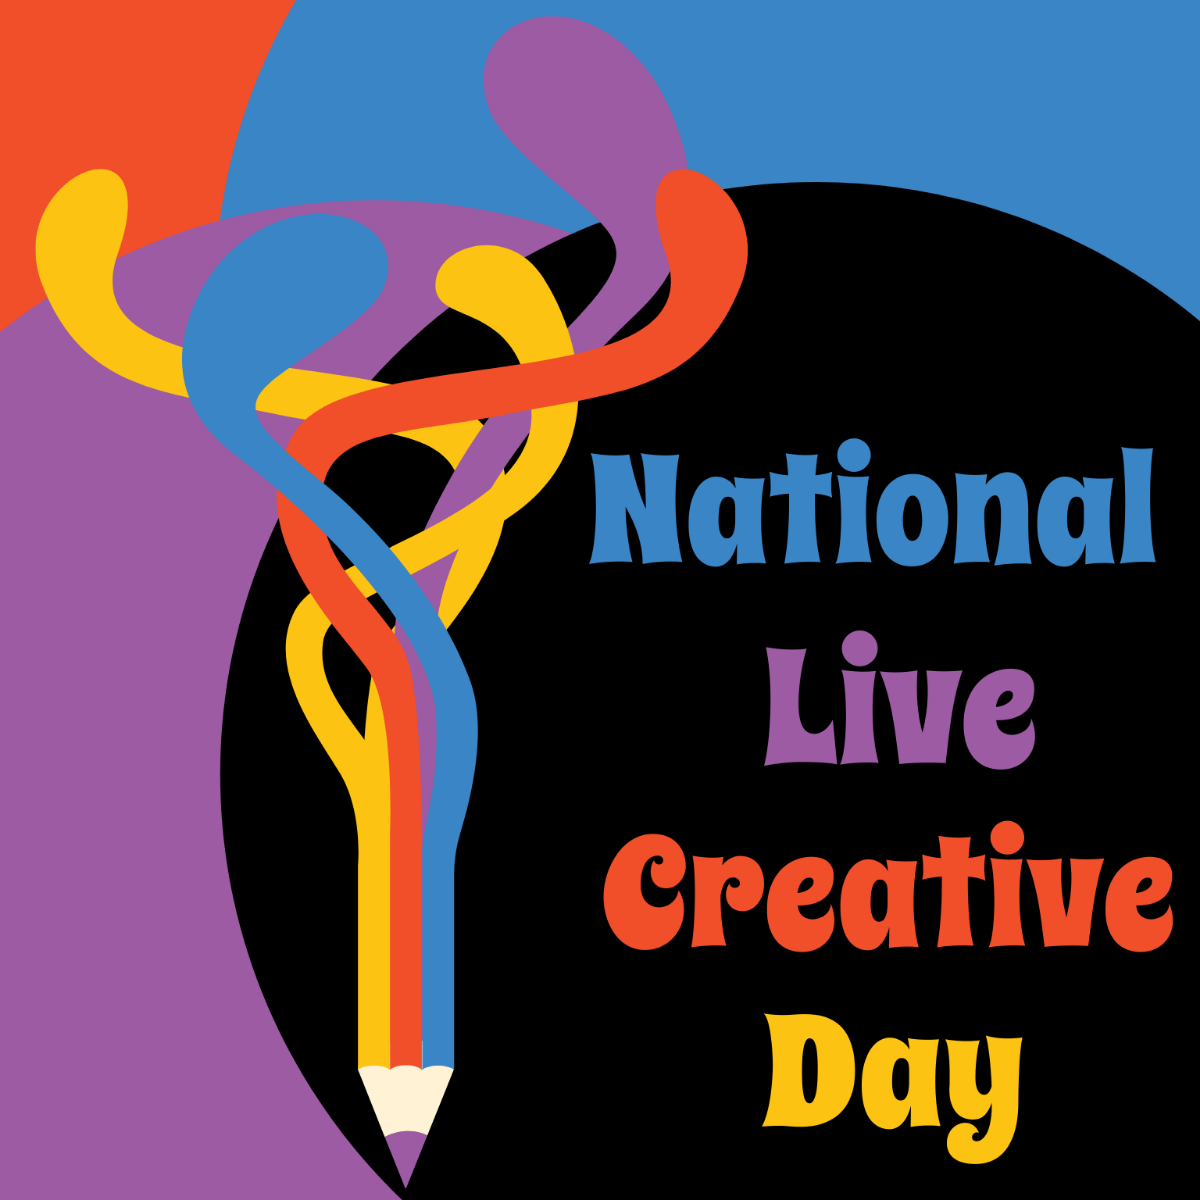 National Live Creative Day Illustration Template